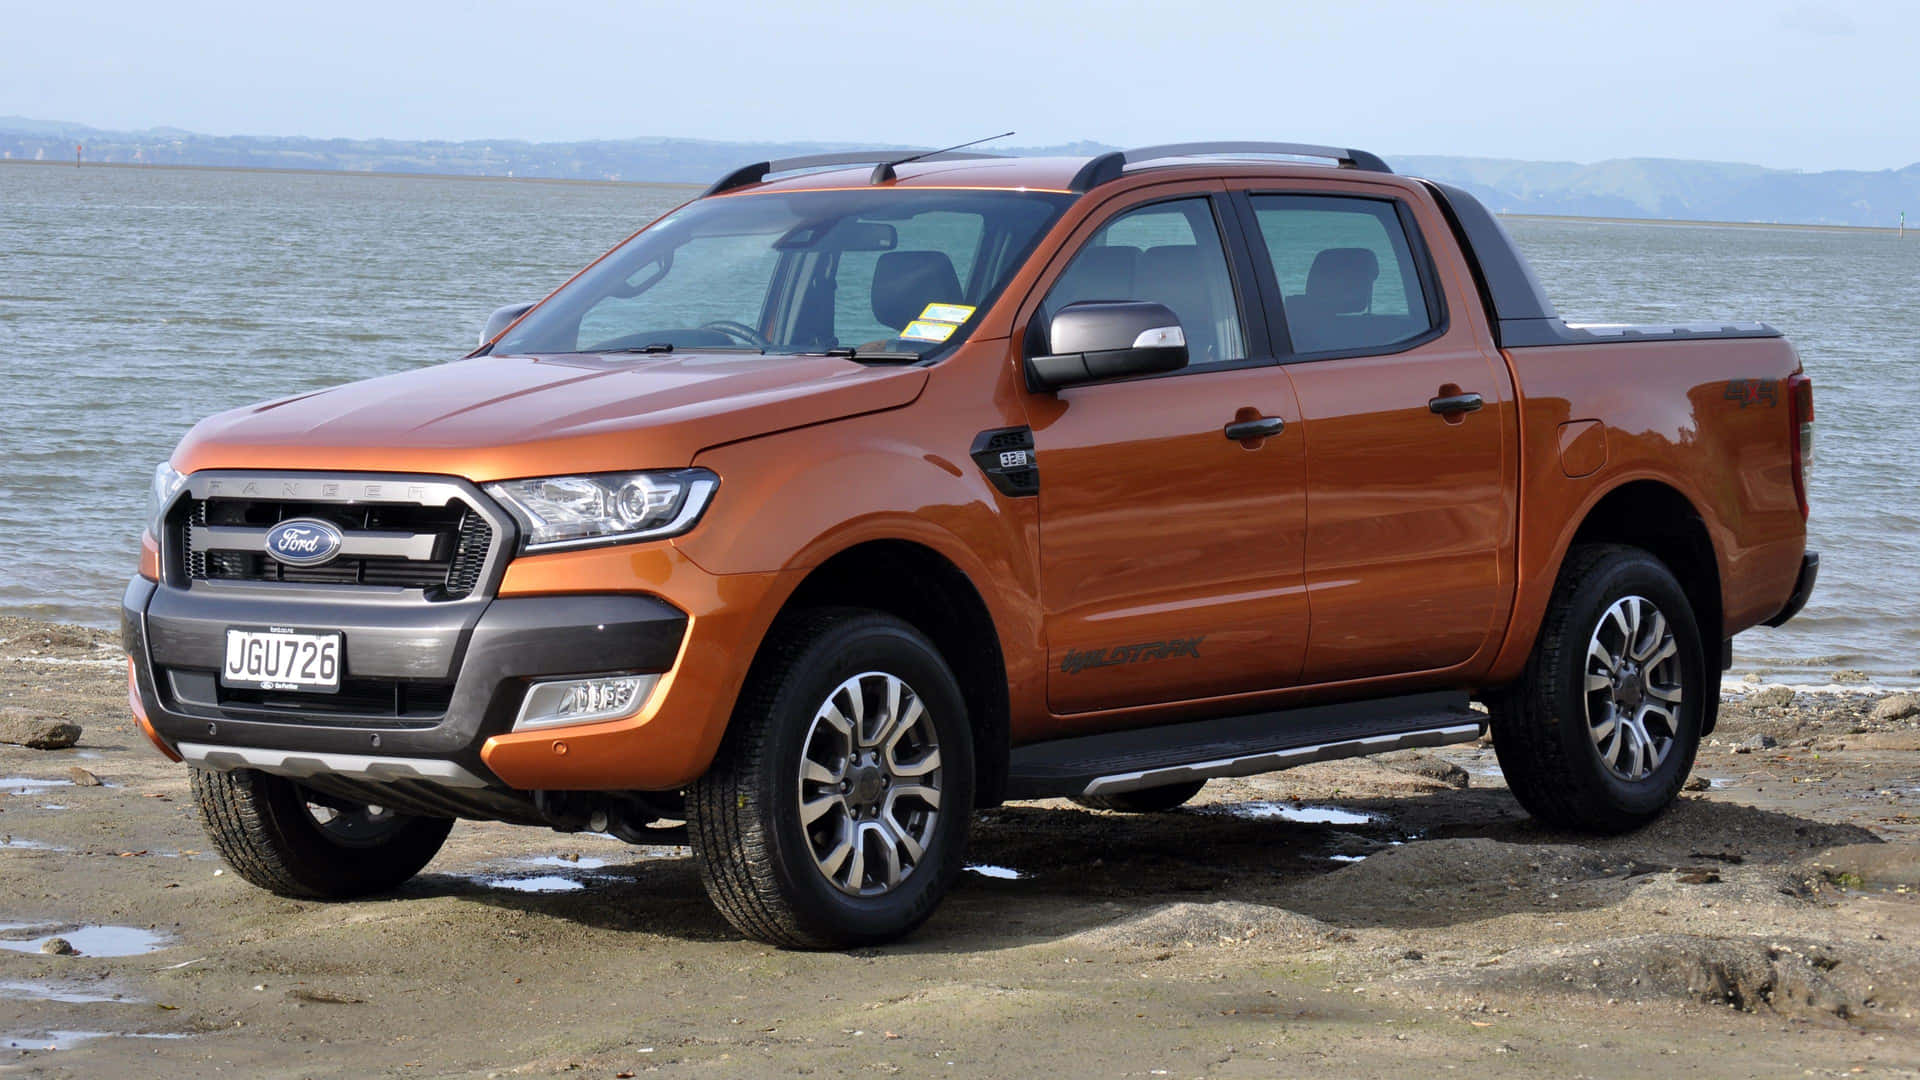 Powerful Ford Ranger in Dynamic Action Wallpaper